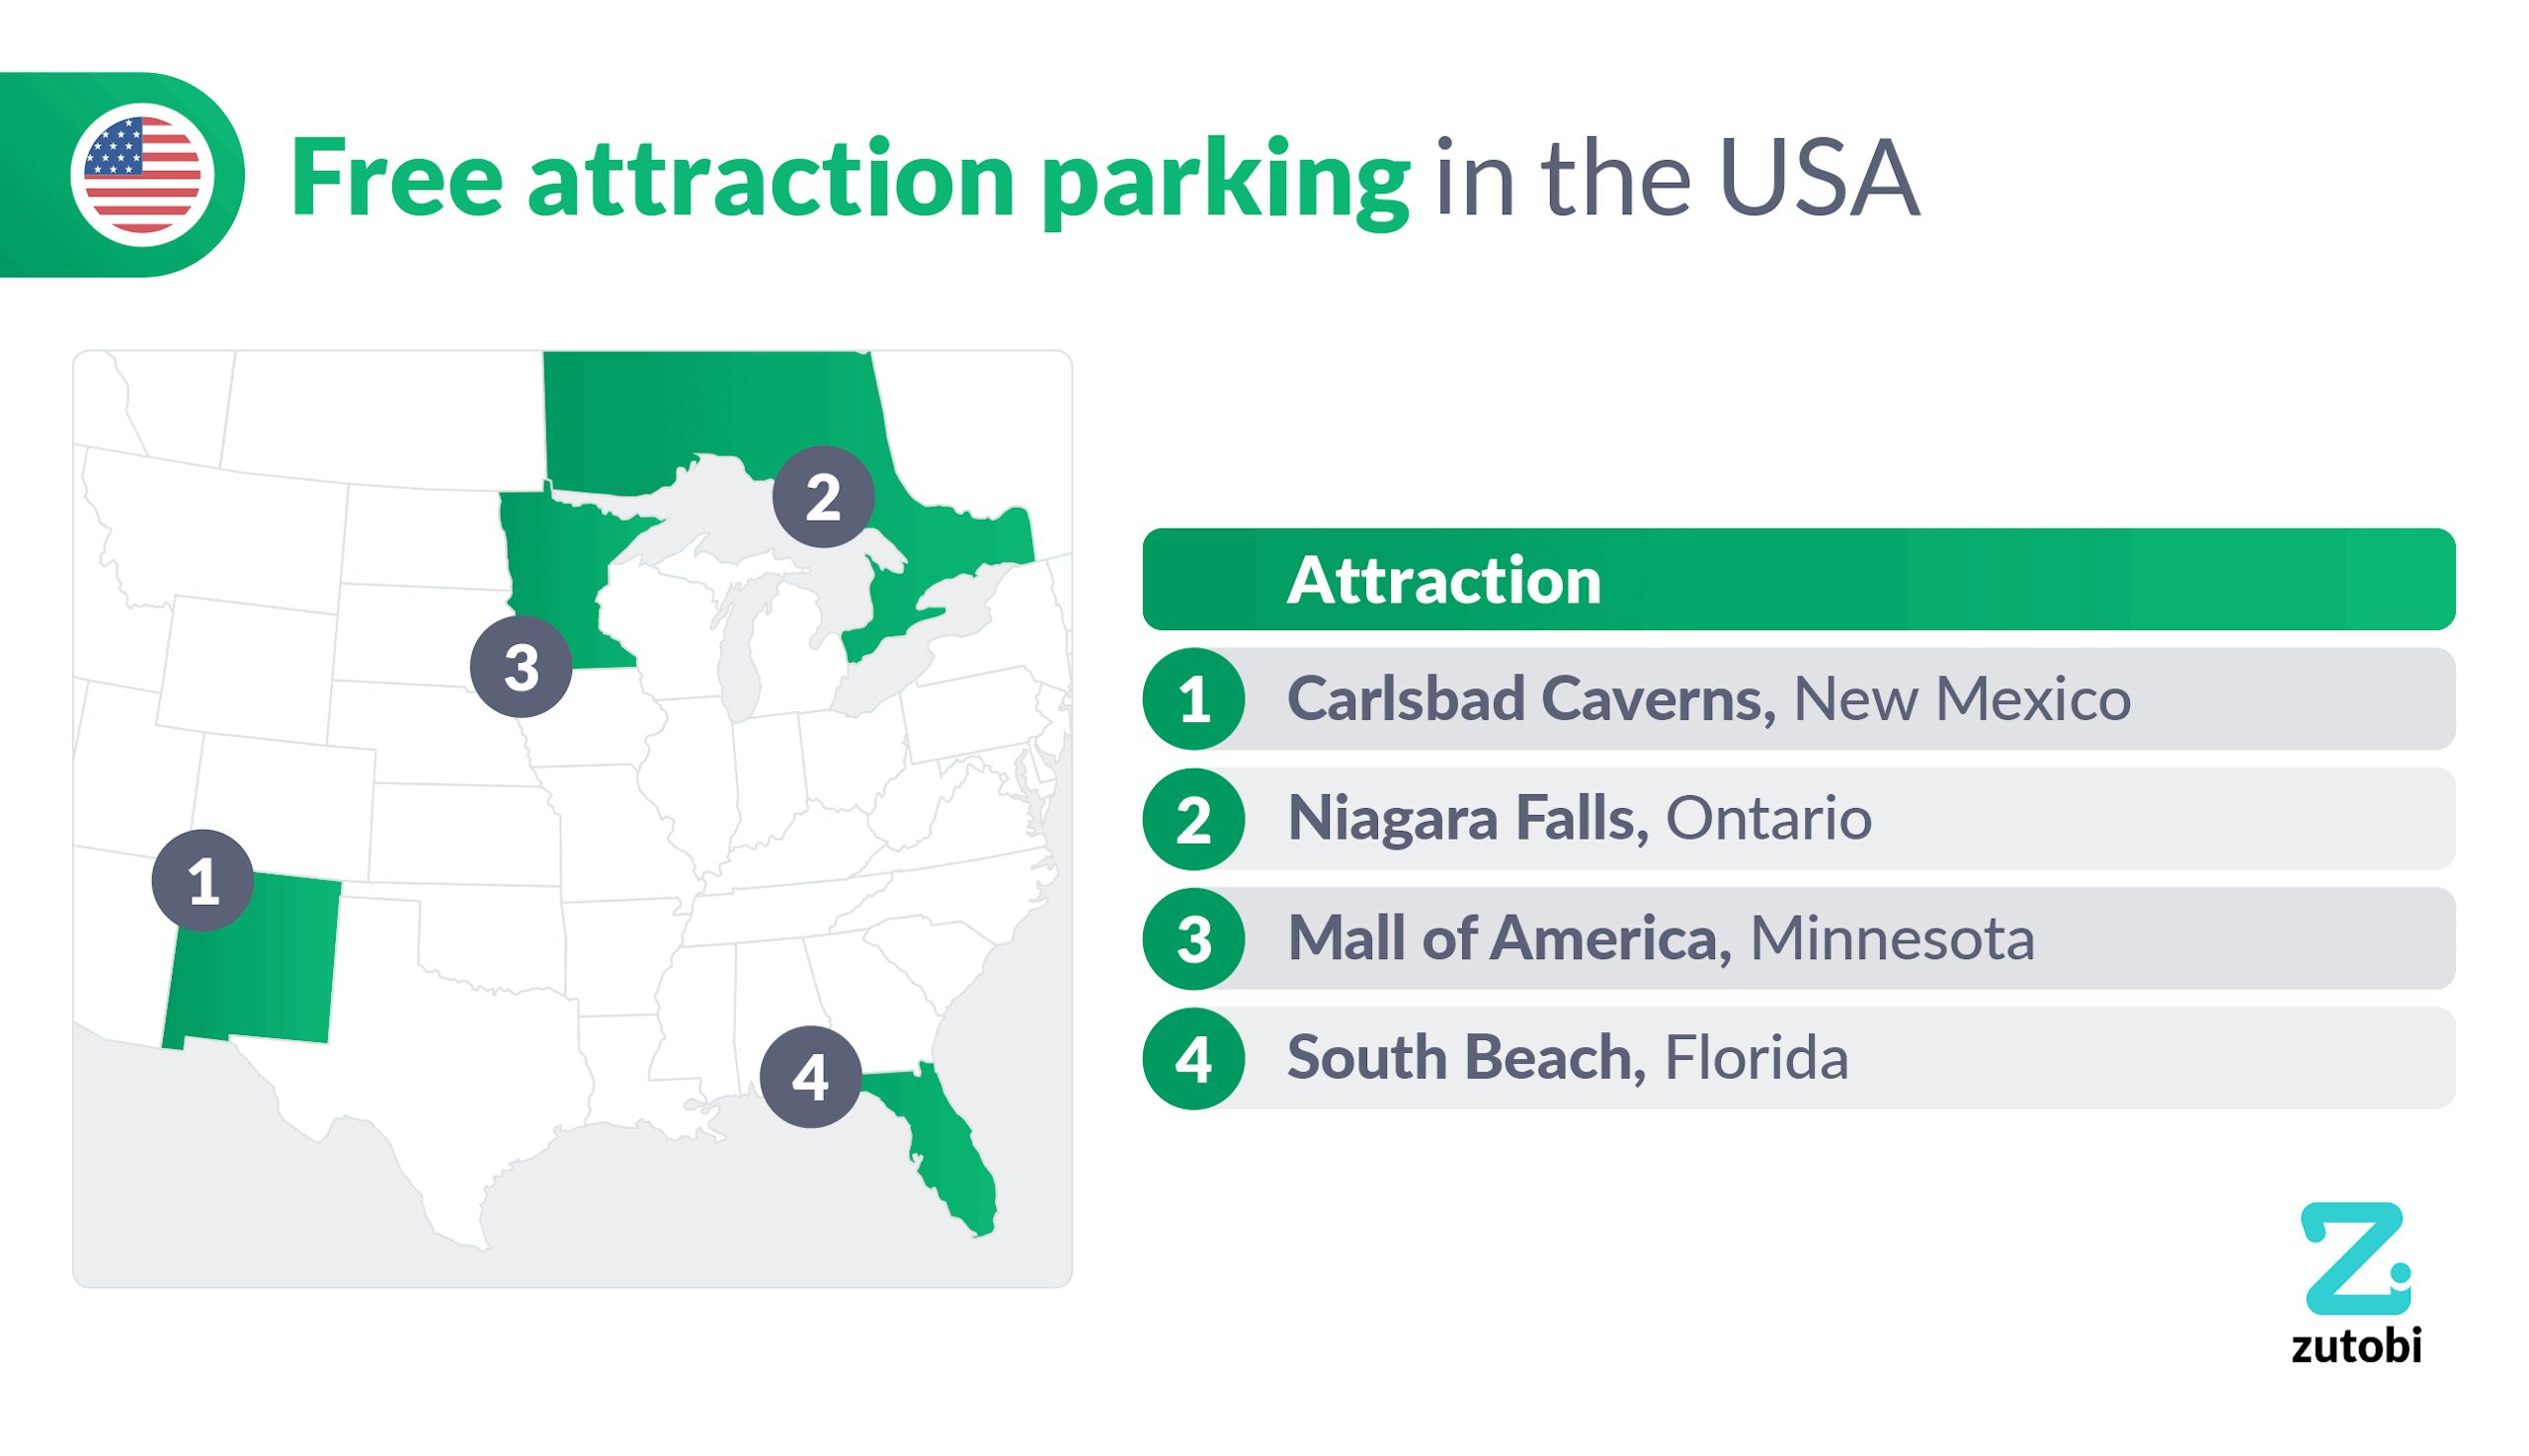 Free attraction parking in the US